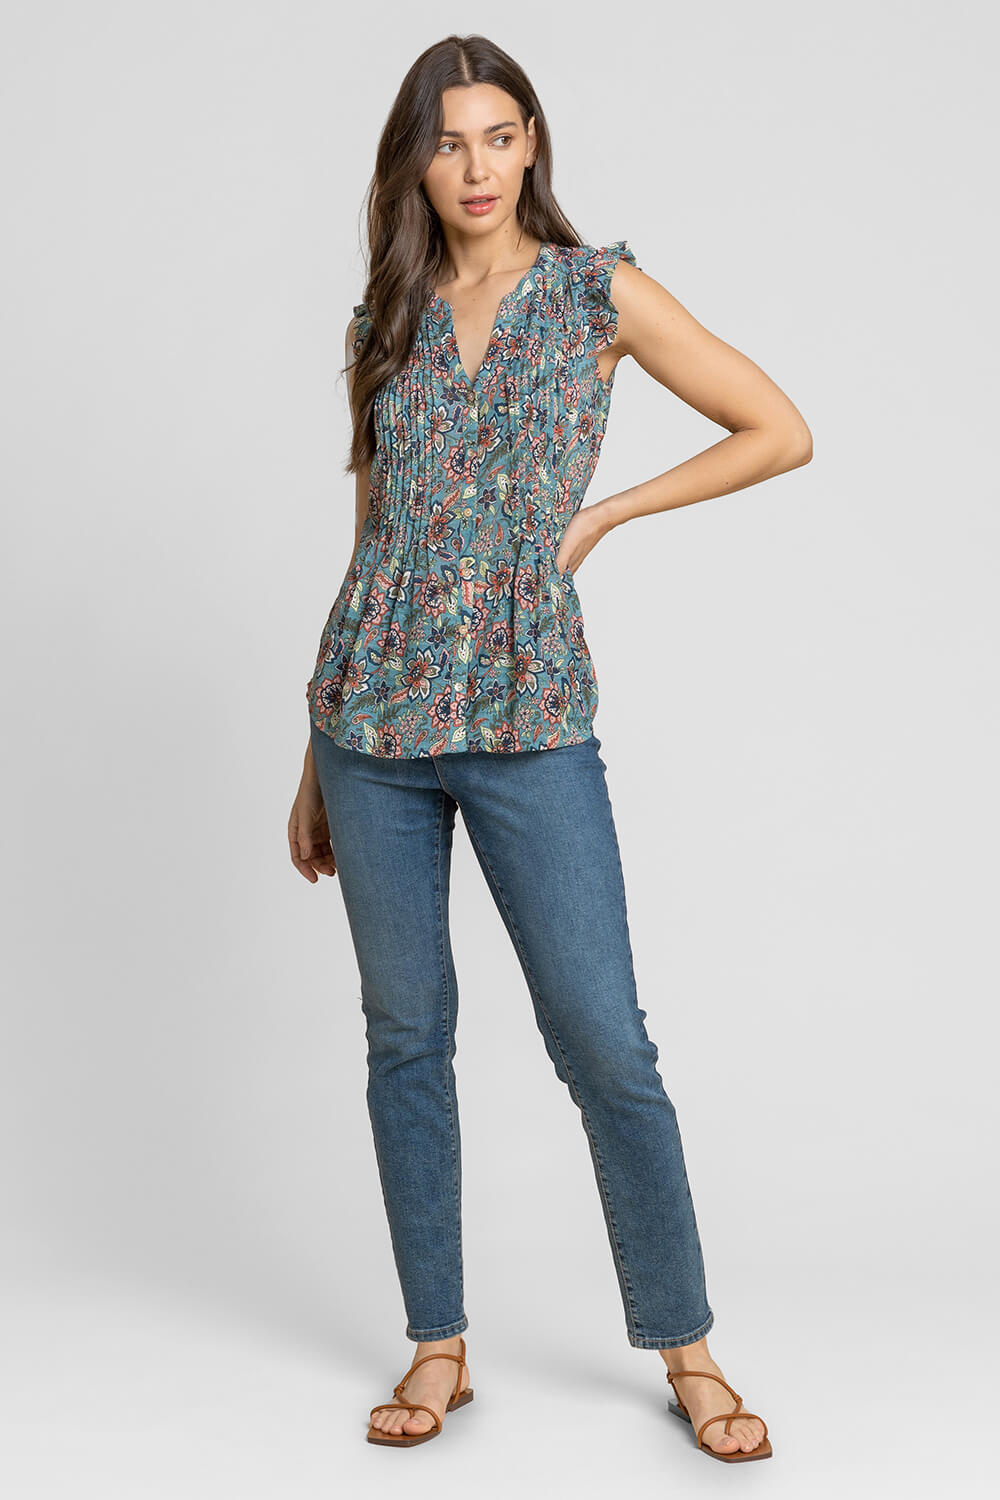 Teal Sleeveless Frill Detail Floral Blouse, Image 3 of 4